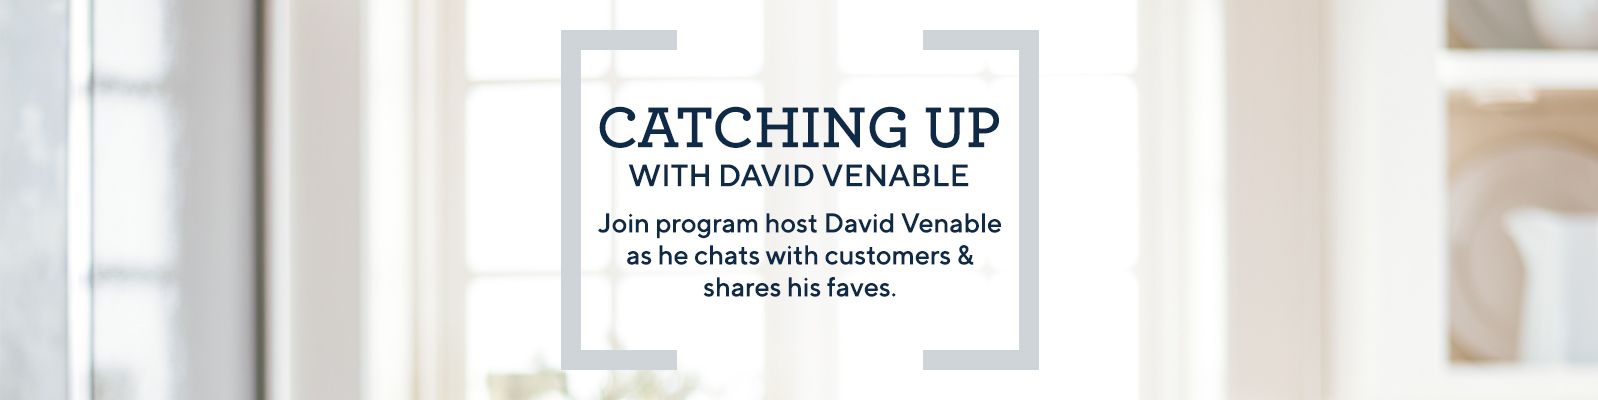 Catching Up with David Venable.  Join program host David Venable as he chats with customers & shares his faves.